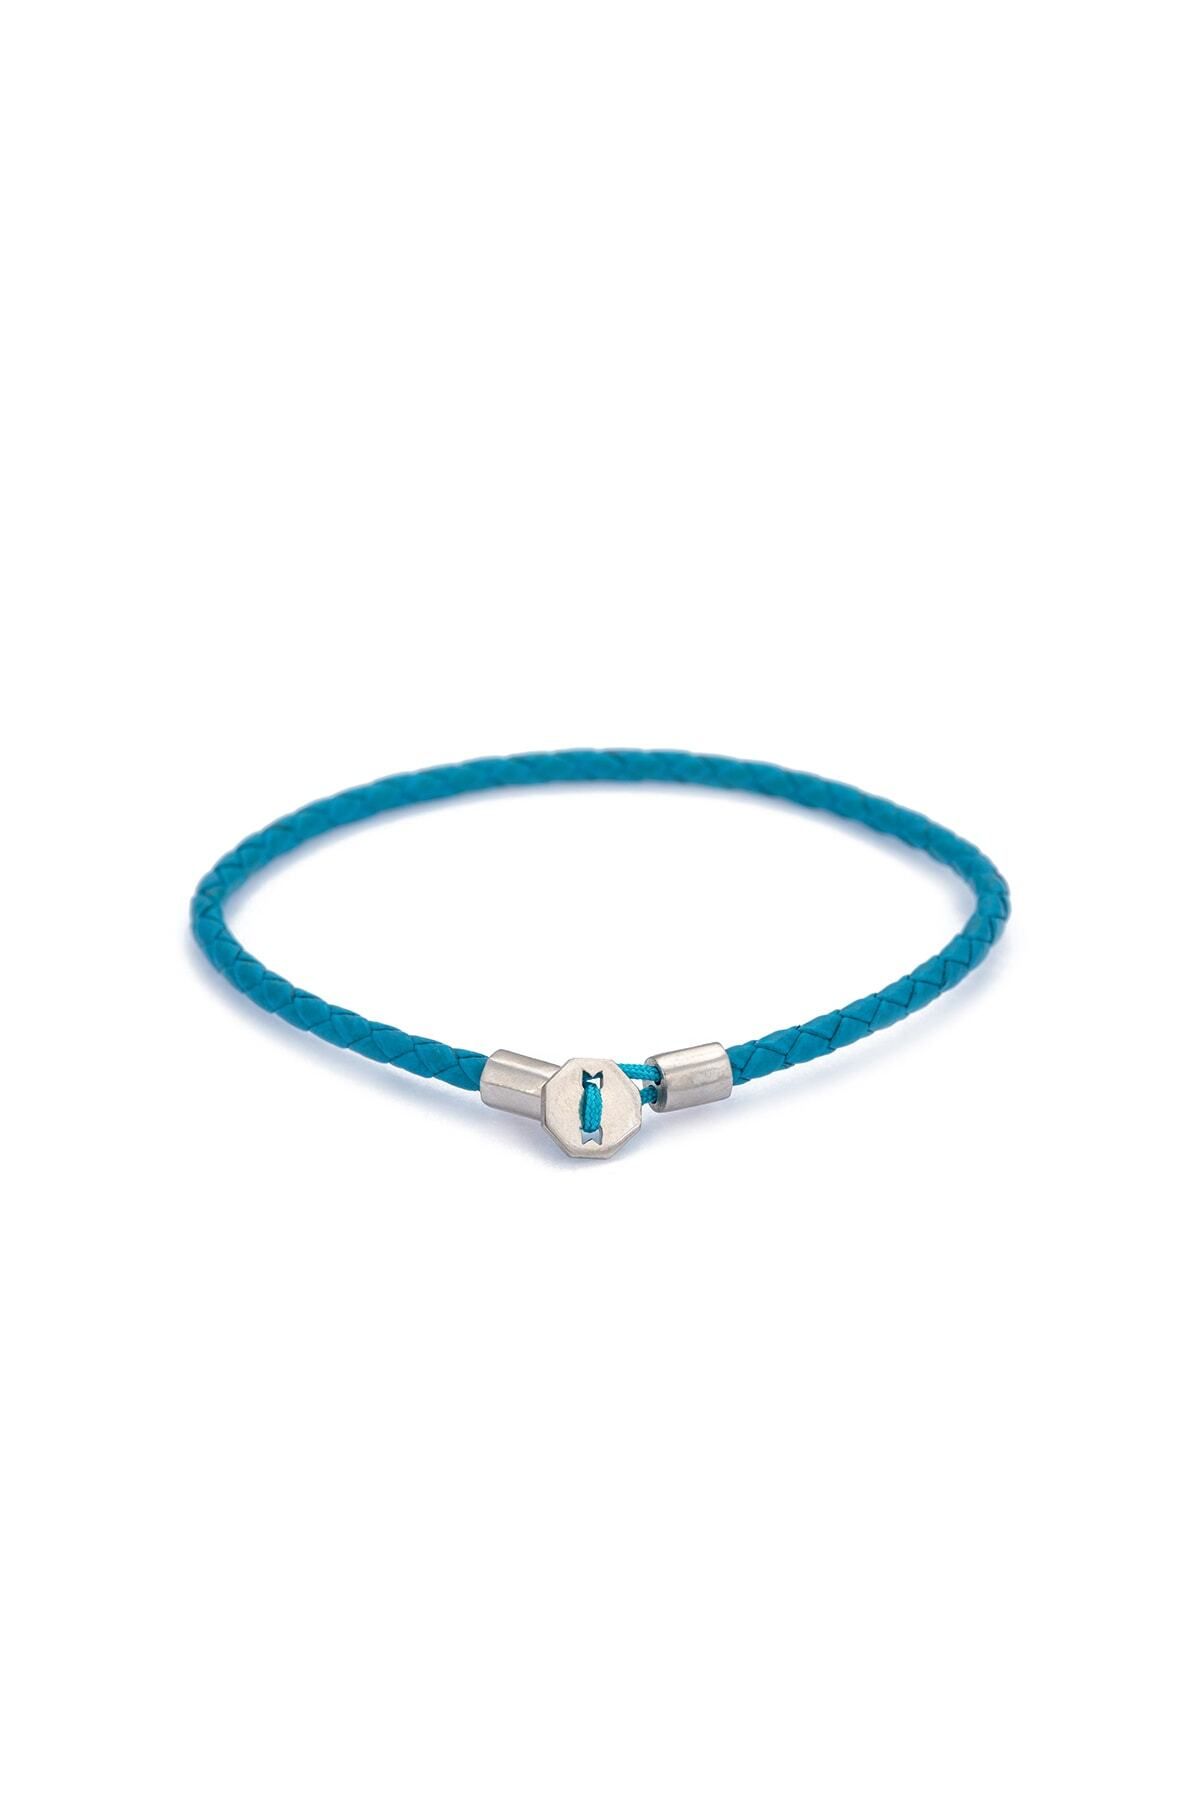 Atolyewolf Blue Leather Chance Bracelet In Silver